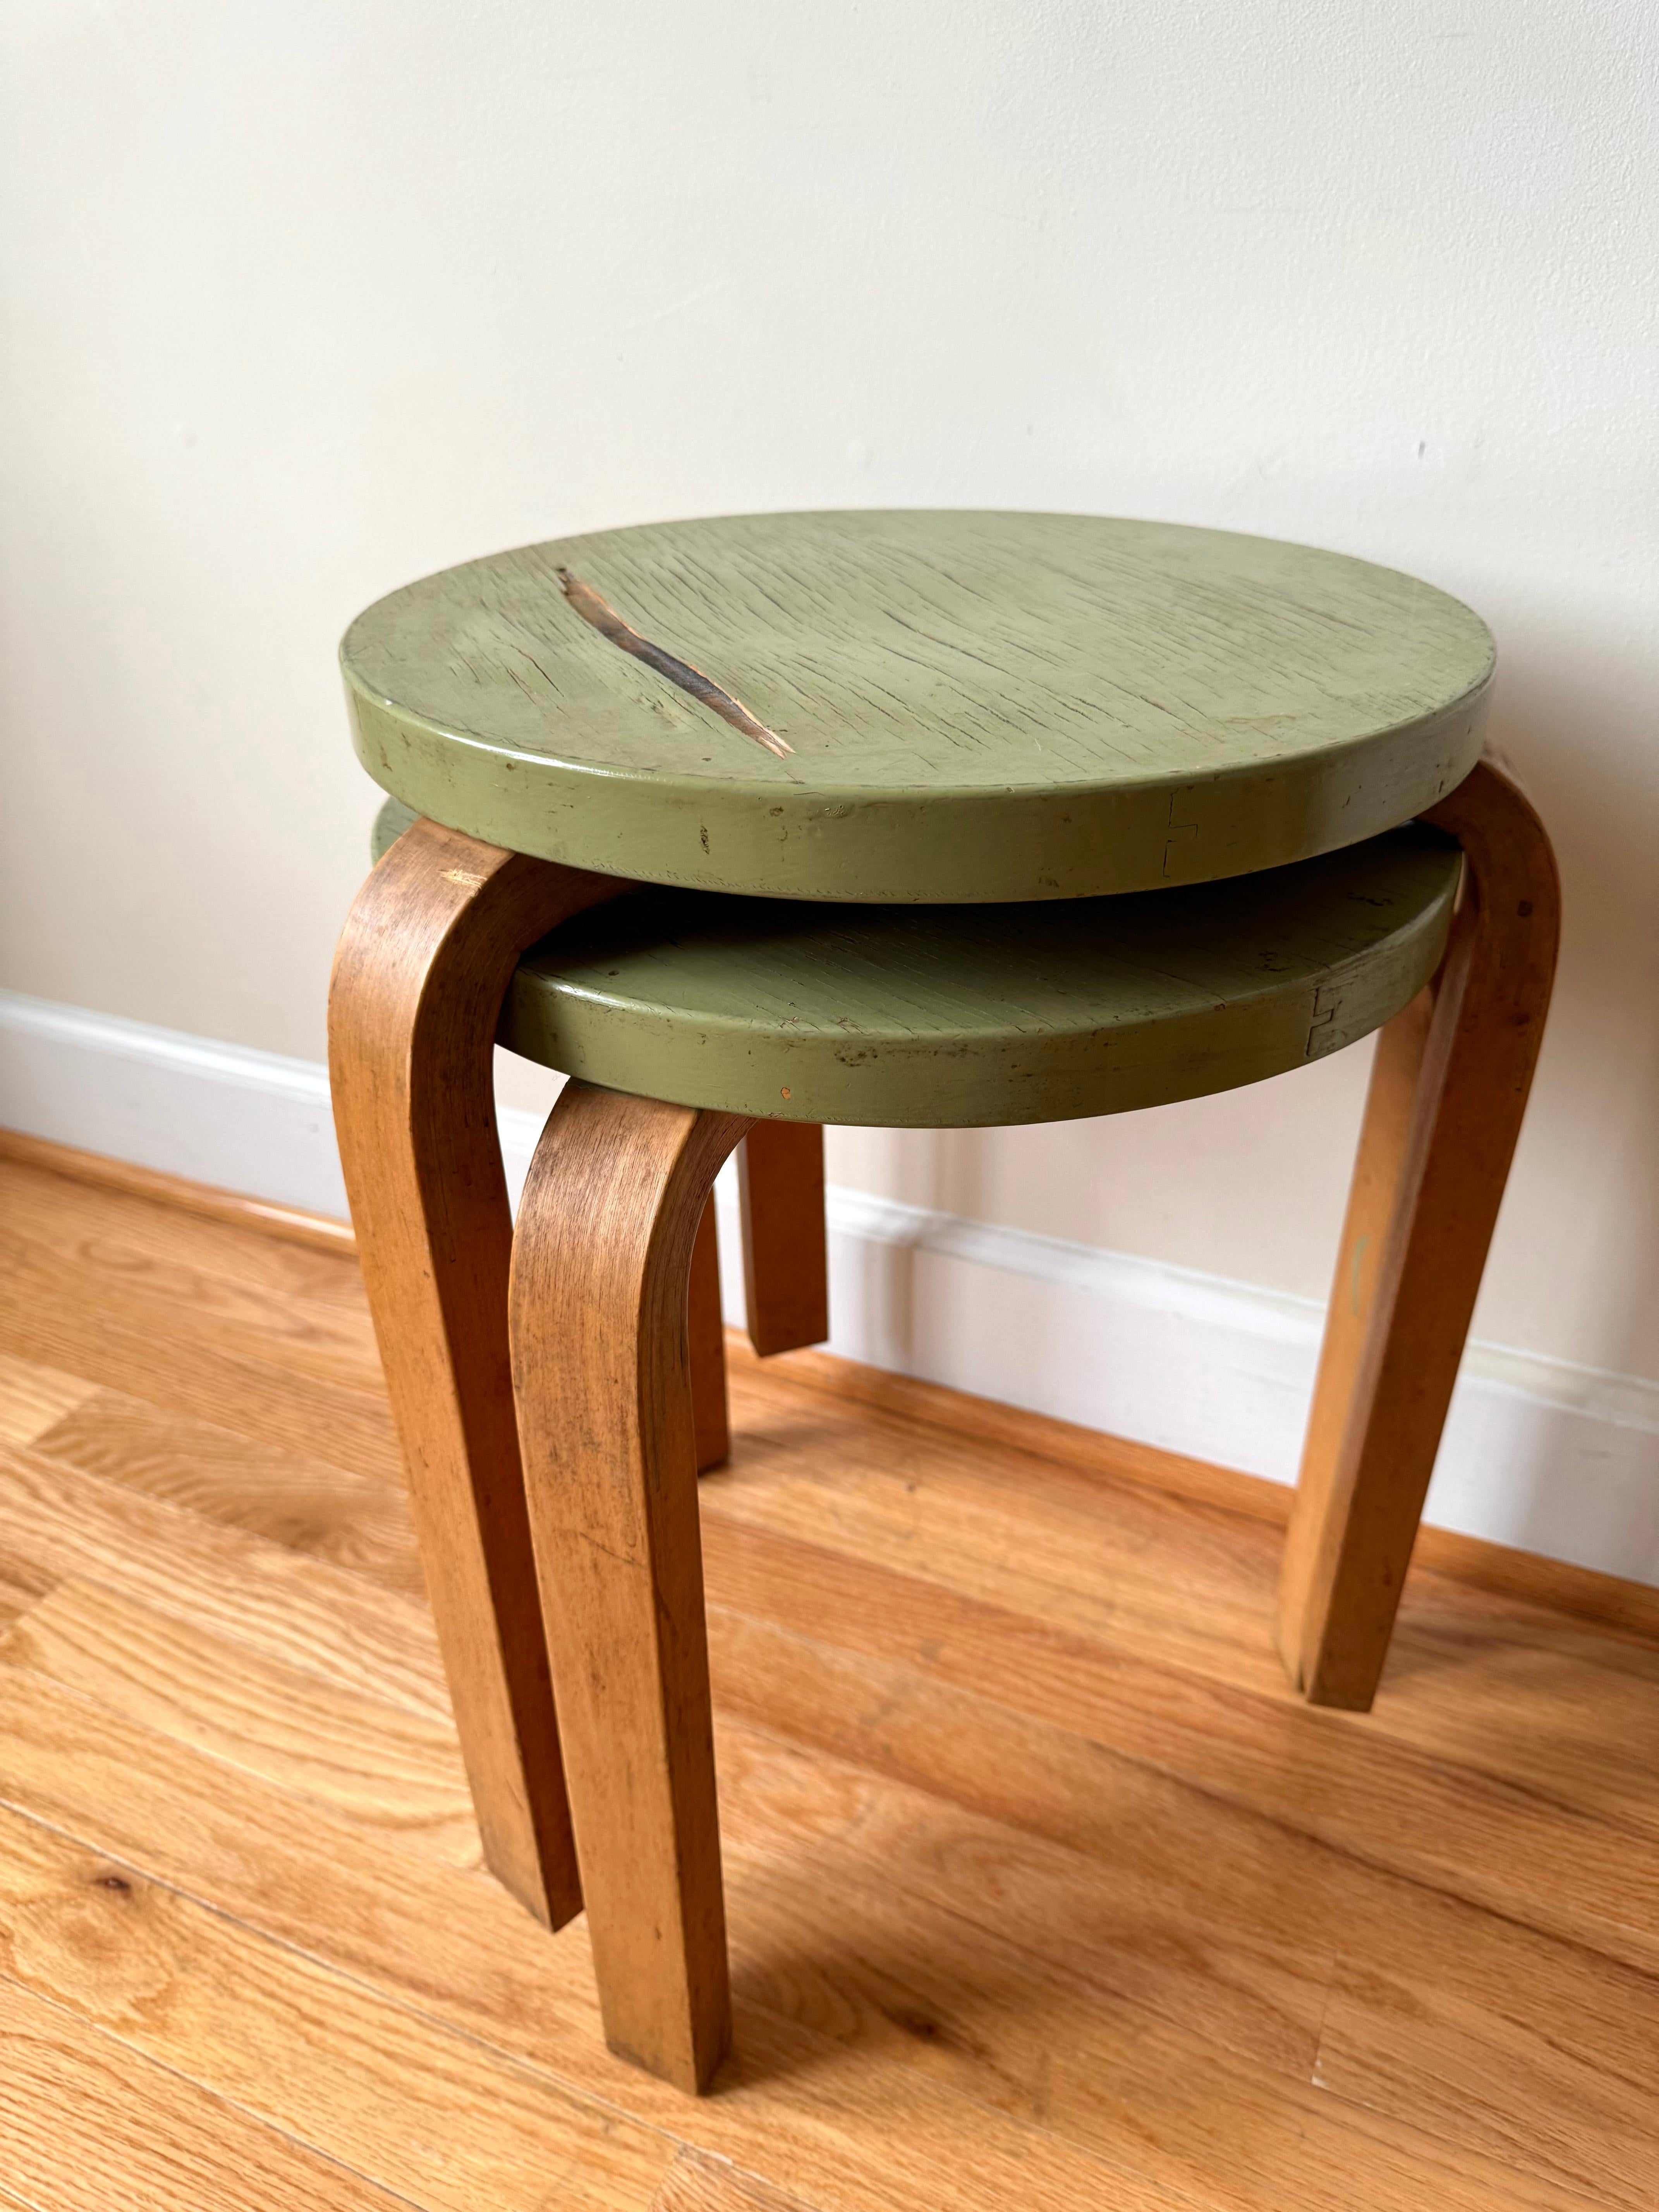 Bentwood Stool 60 with finger joint seat by Alvar Aalto for Artek, 1930-40s For Sale